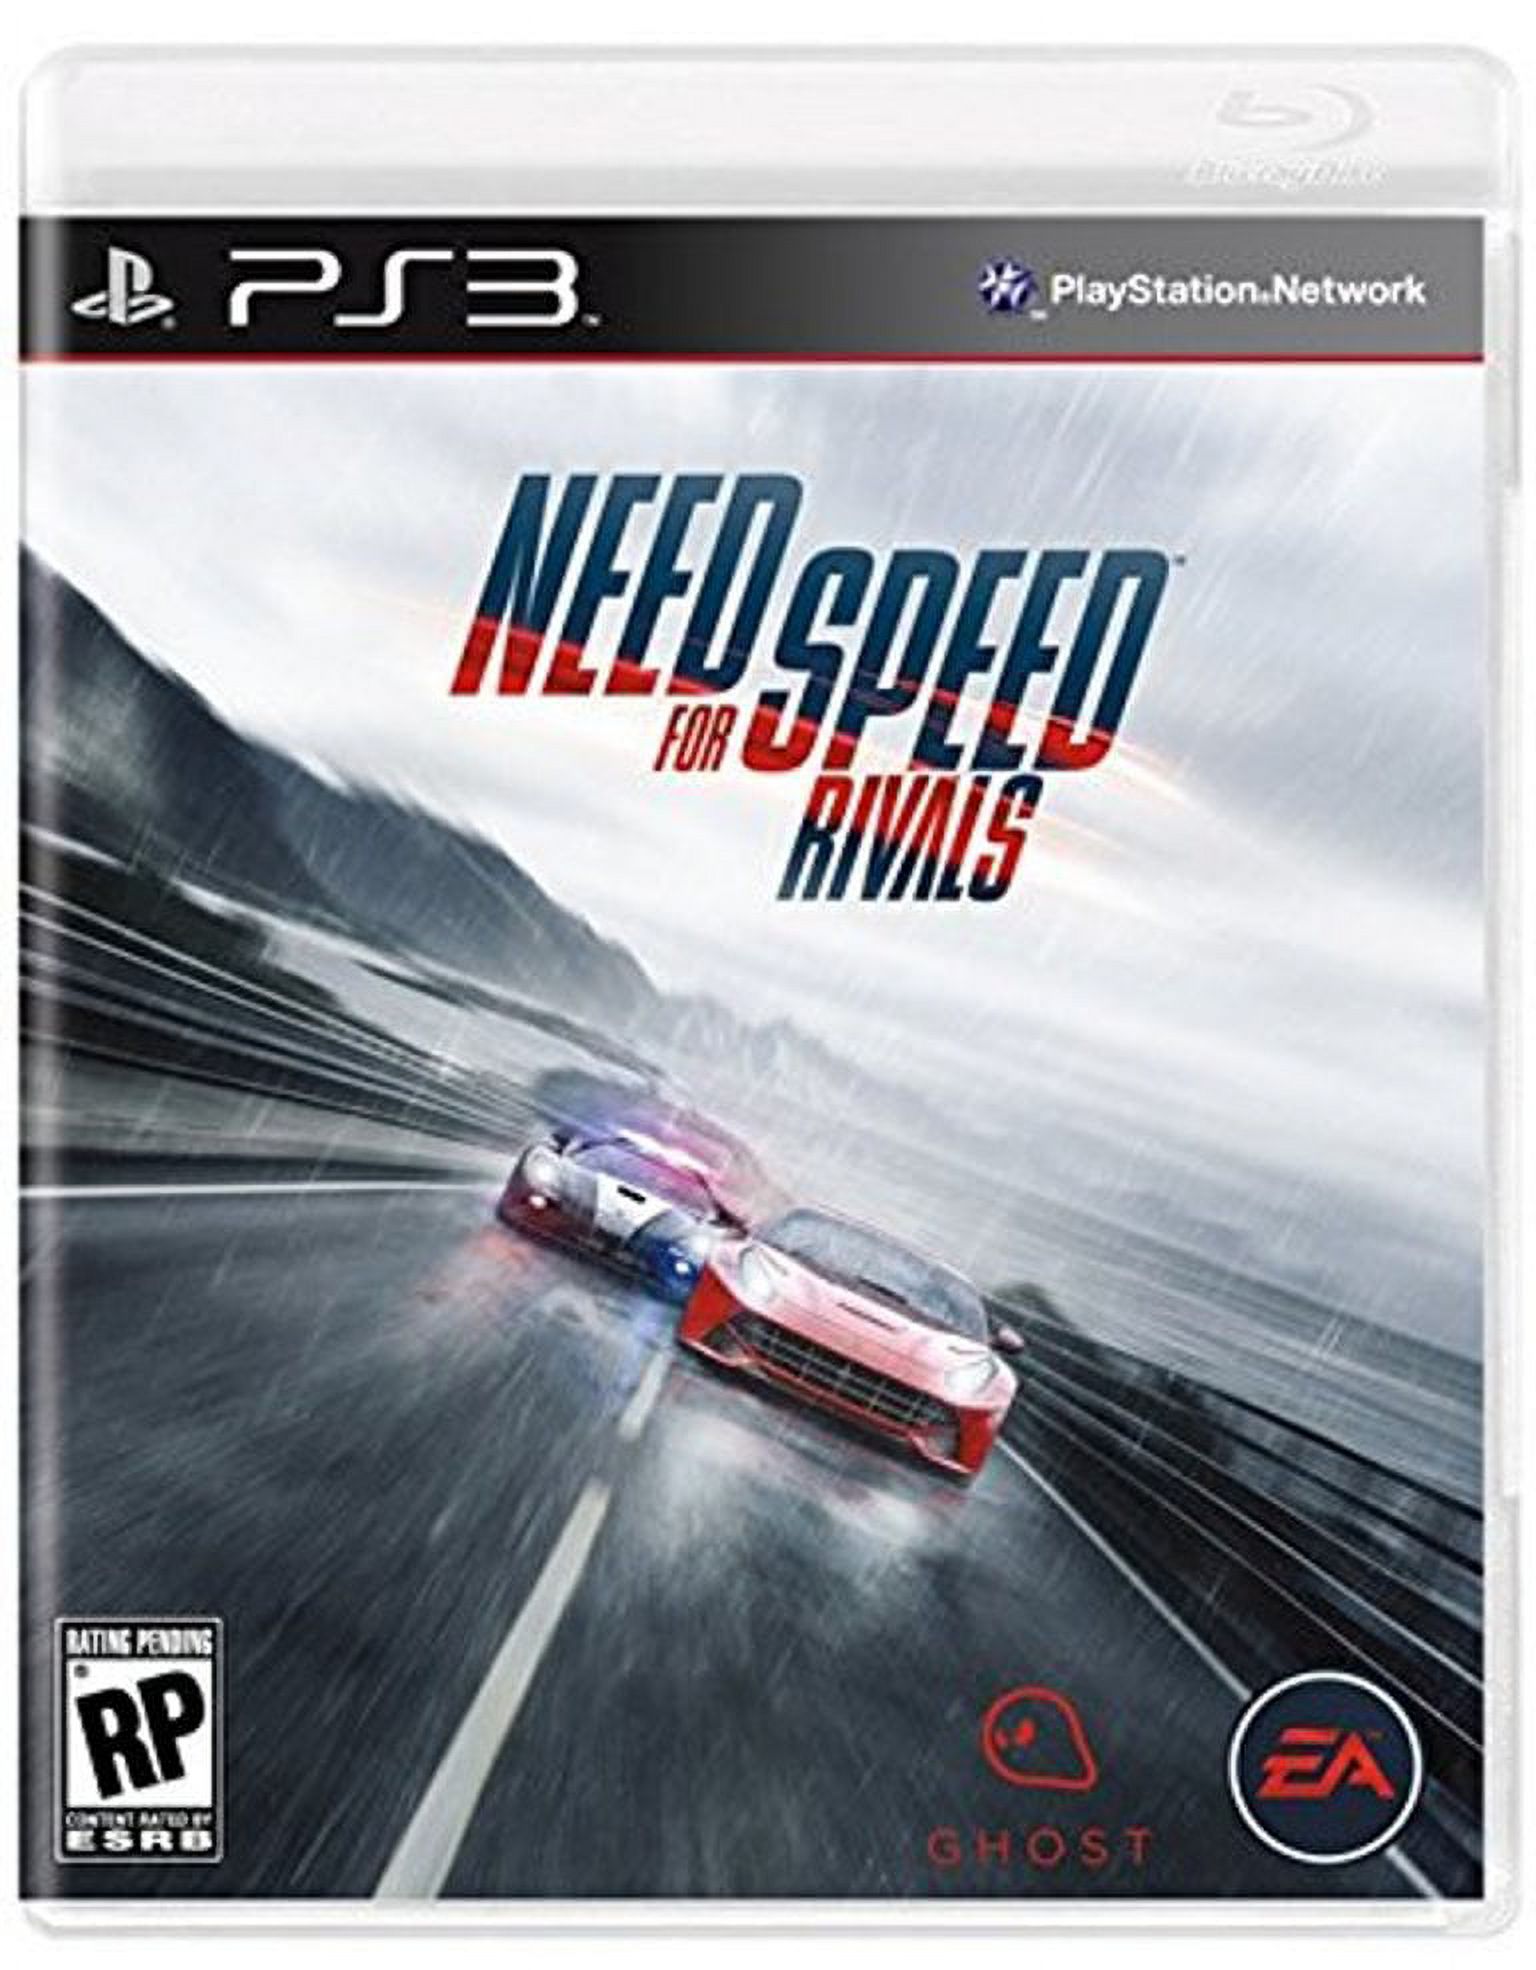 EA Sports Need For Speed: Rivals (PS3) Video Game - image 3 of 5